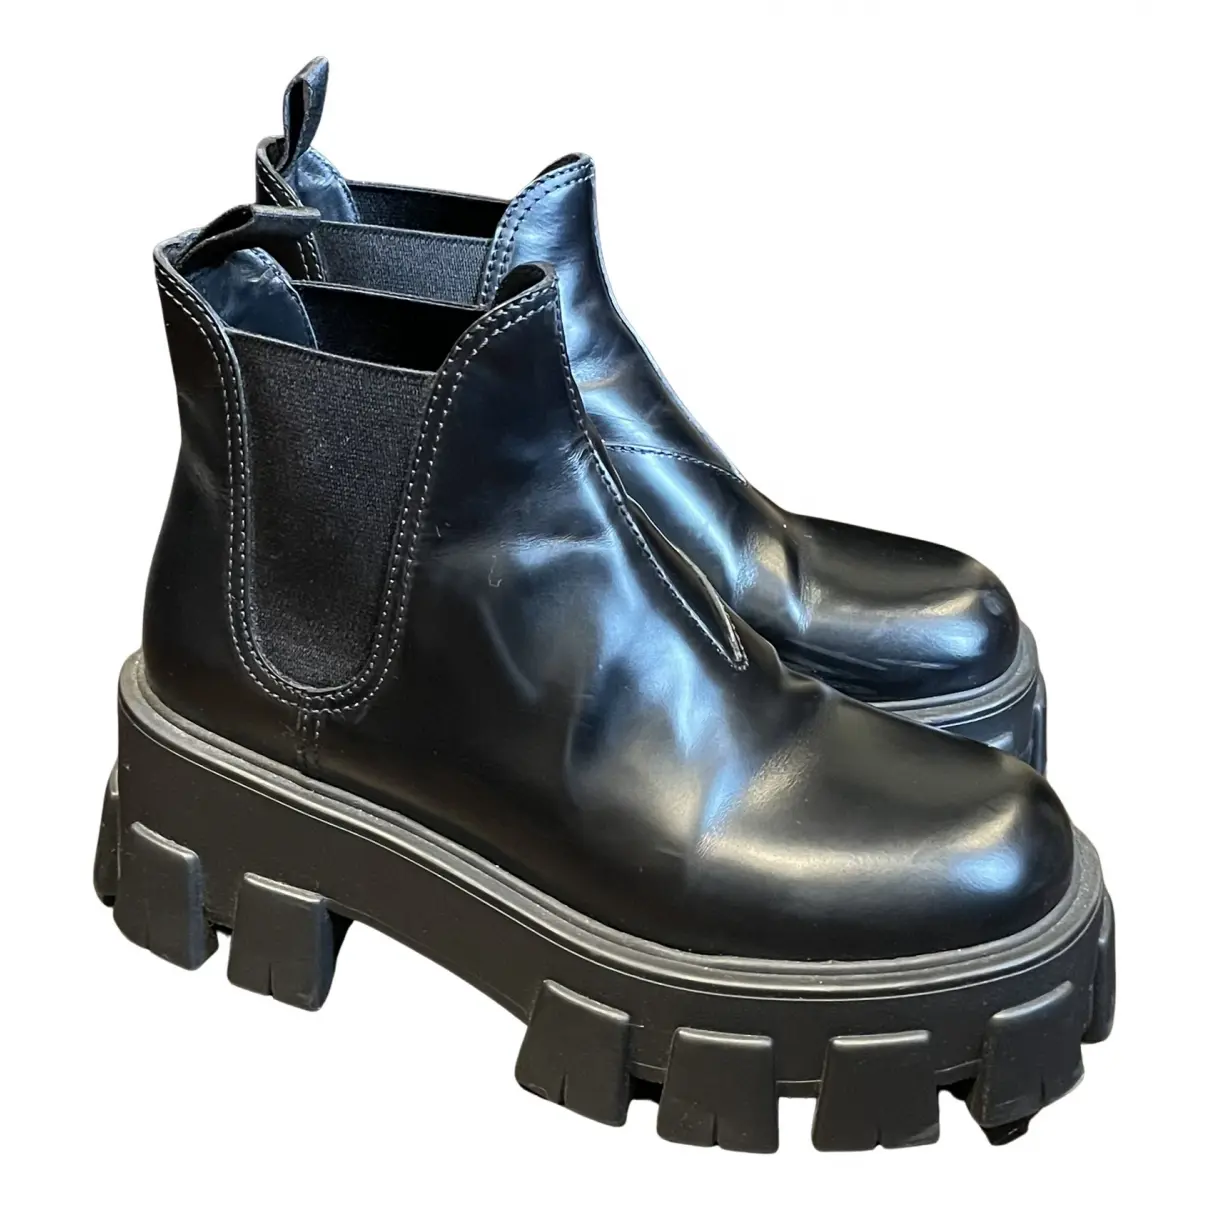 Monolith leather ankle boots Prada